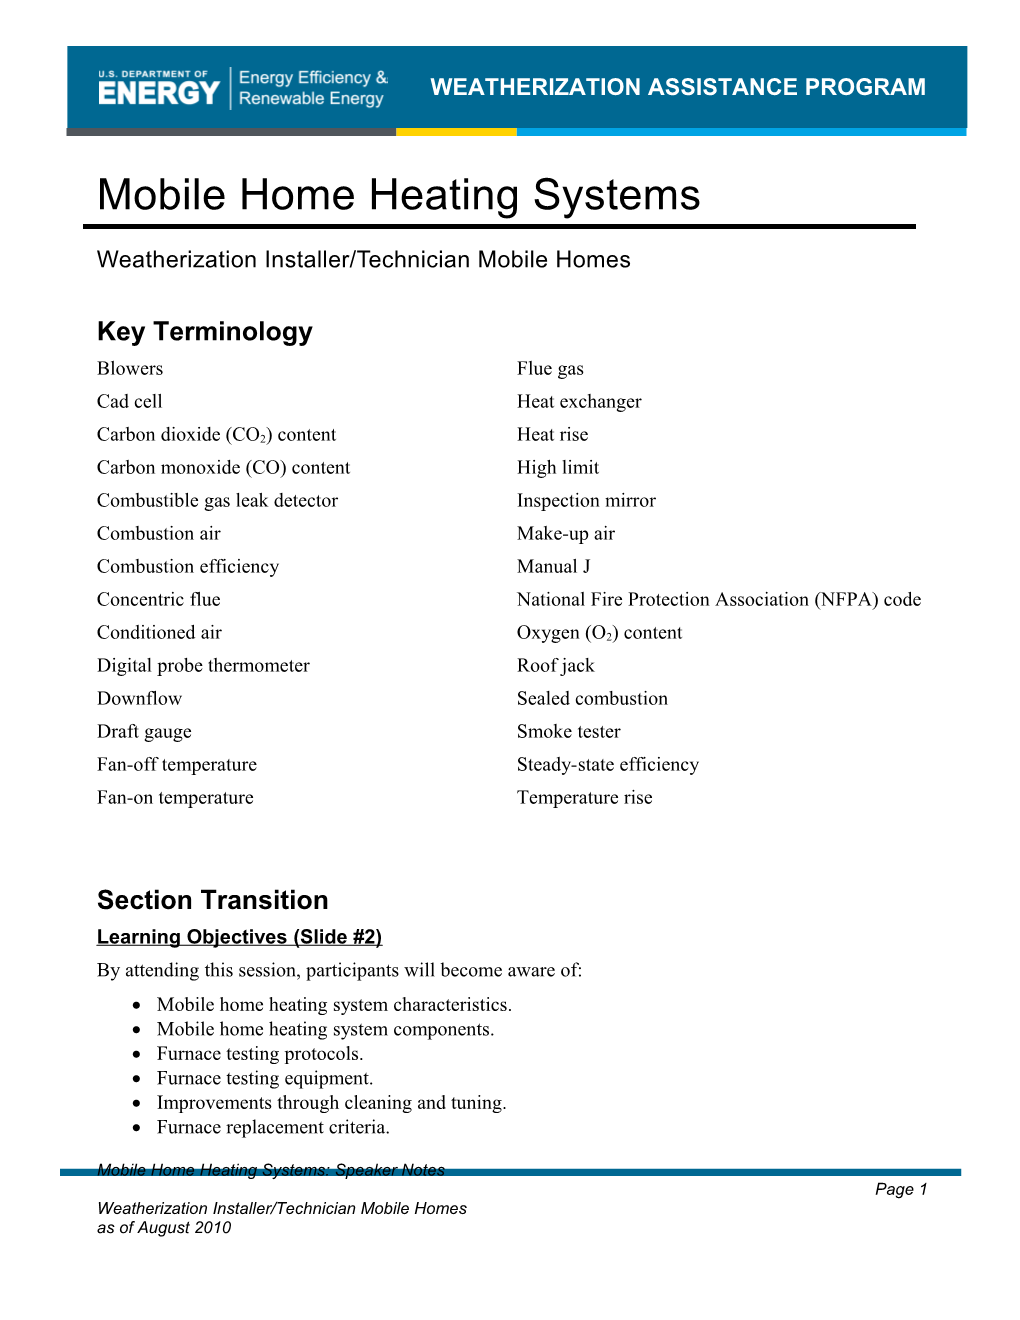 Mobile Home Heating Systems